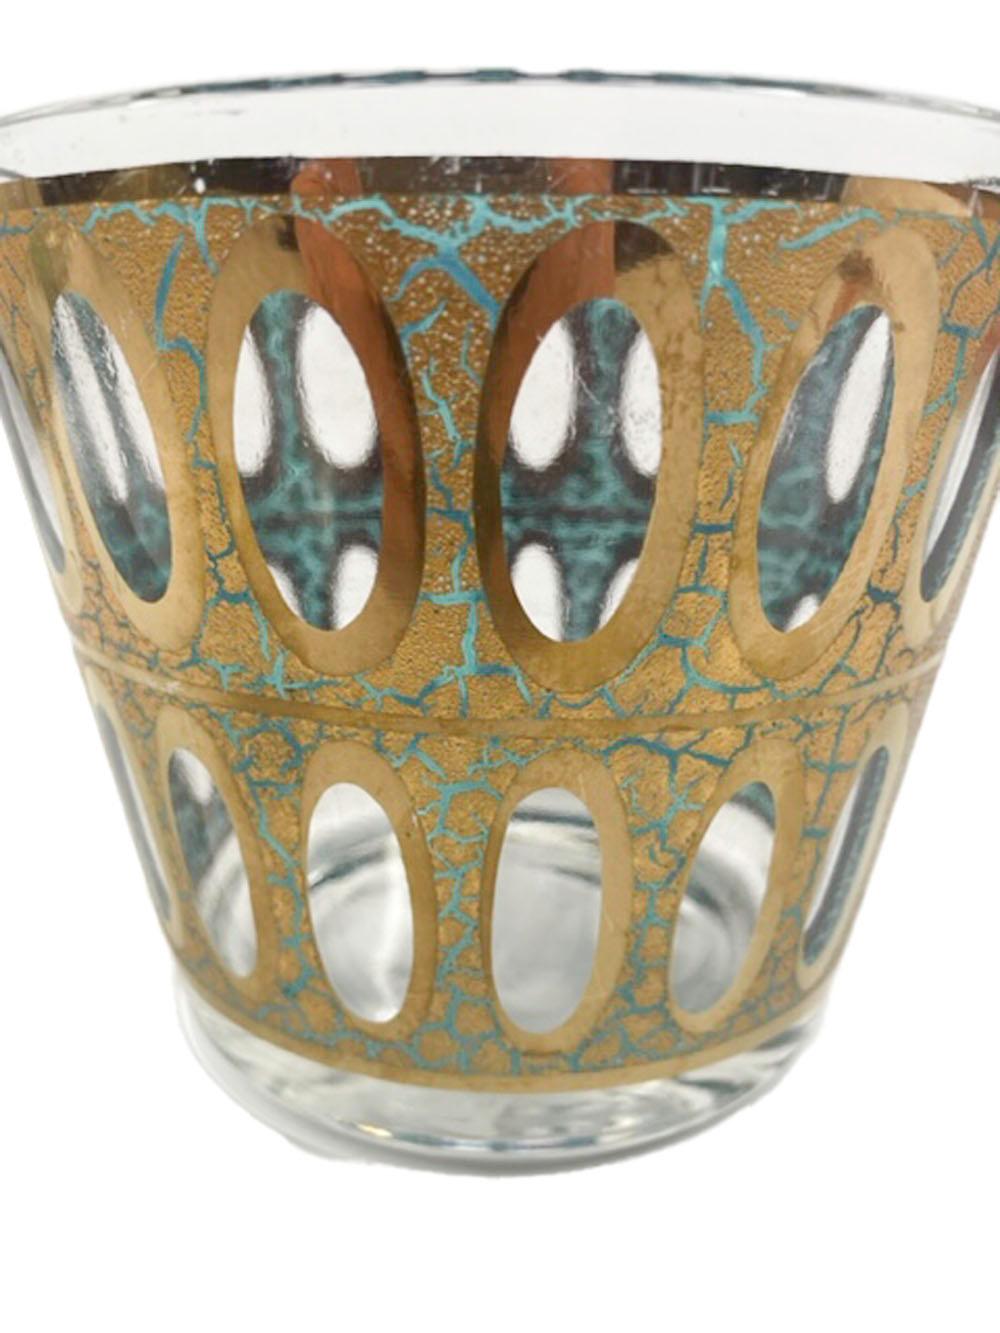 Mid-Century Modern ice bowl by Culver, Ltd., in the Pisa pattern having green translucent enamel below 22 karat gold with a crackled finish exposing the enamel on the exterior with the interior showing the enamel with the crackled gold highlighting